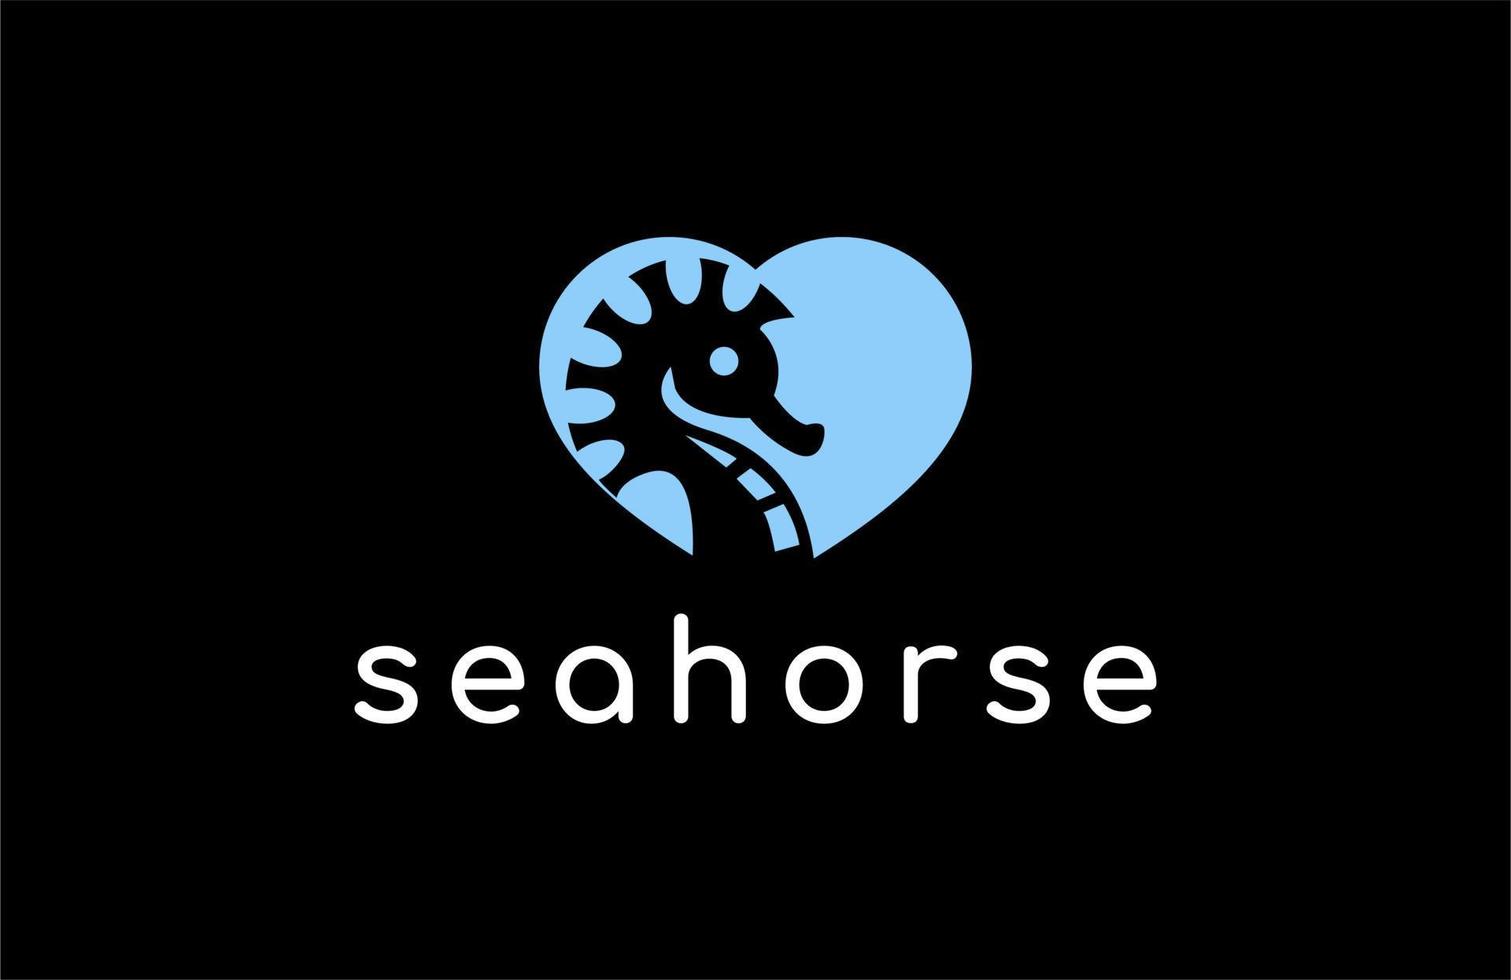 Seahorses are loved with the combination of love. clean and elegant design. Vector illustration